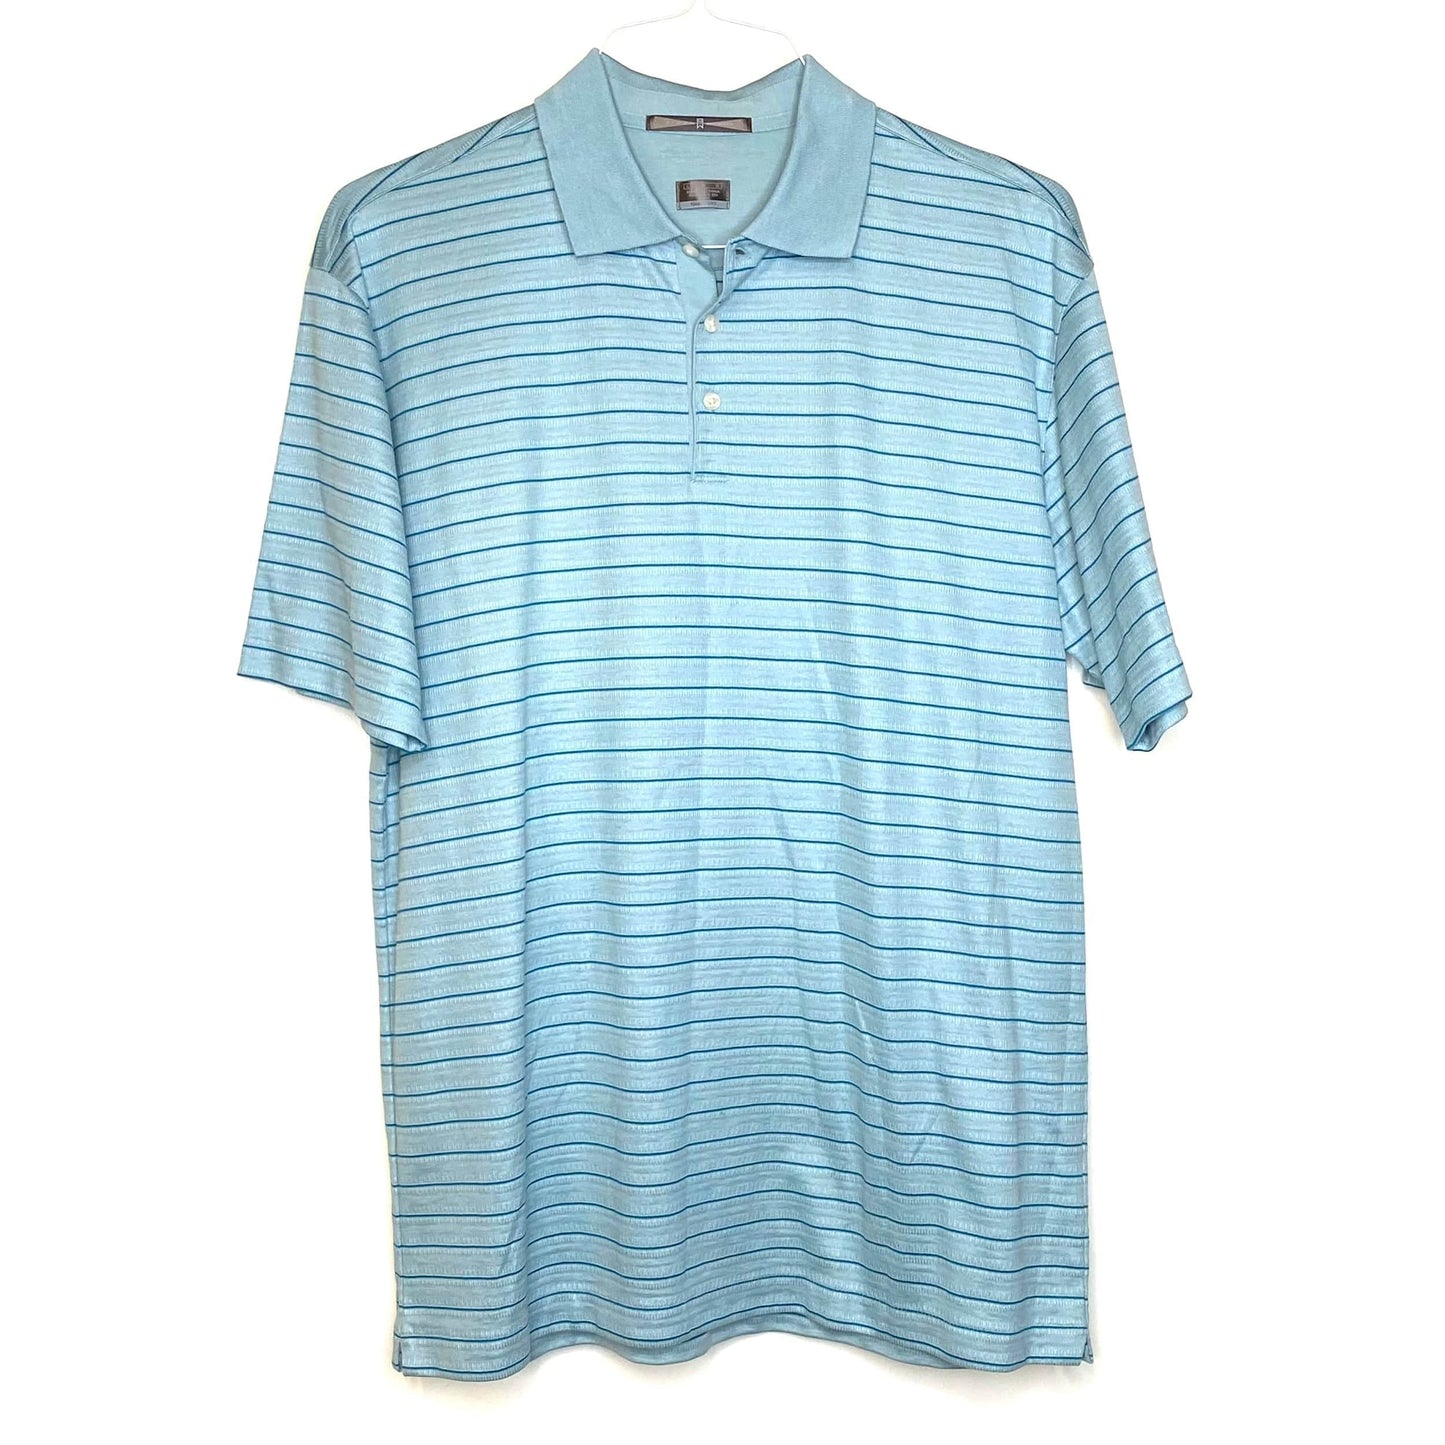 Tiger Woods Collection Nike Mens Size L Blueish Gray Stiped Polo Golf Shirt Fit Dry S/s